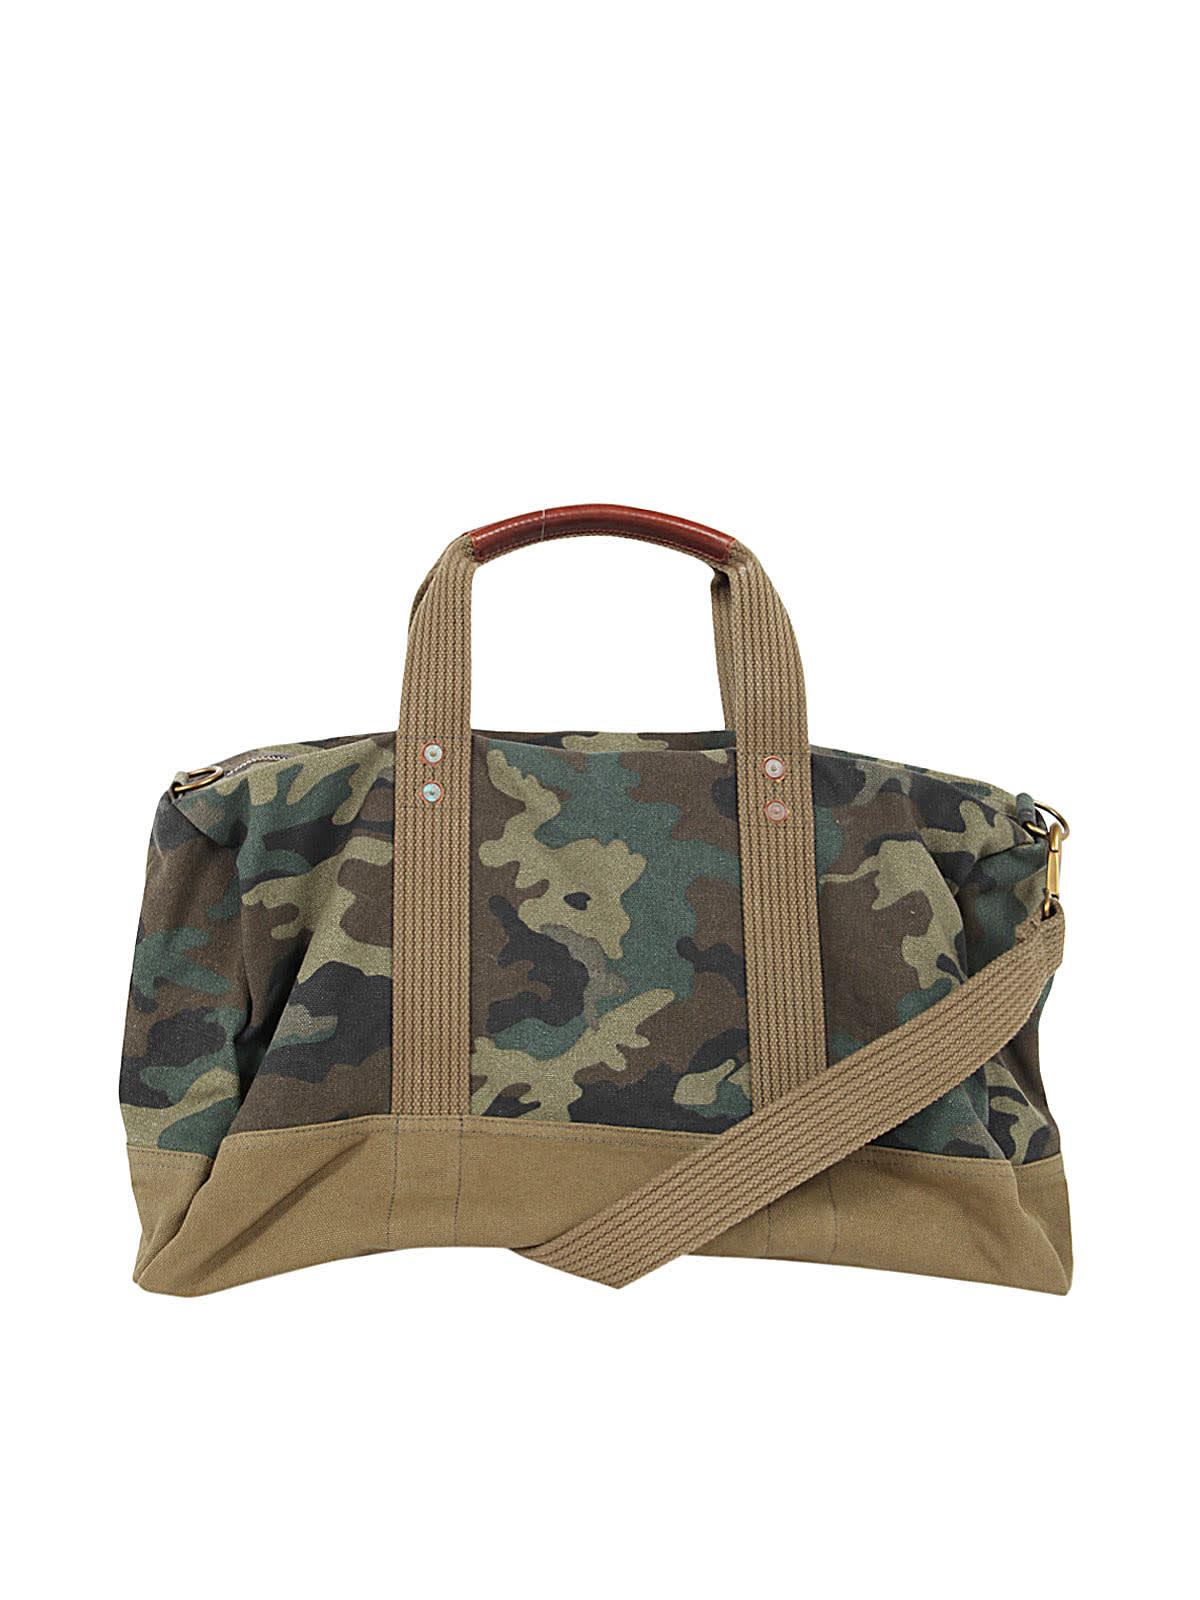 Polo Ralph Lauren Camouflage Leather Duffel Bag in Gray for Men